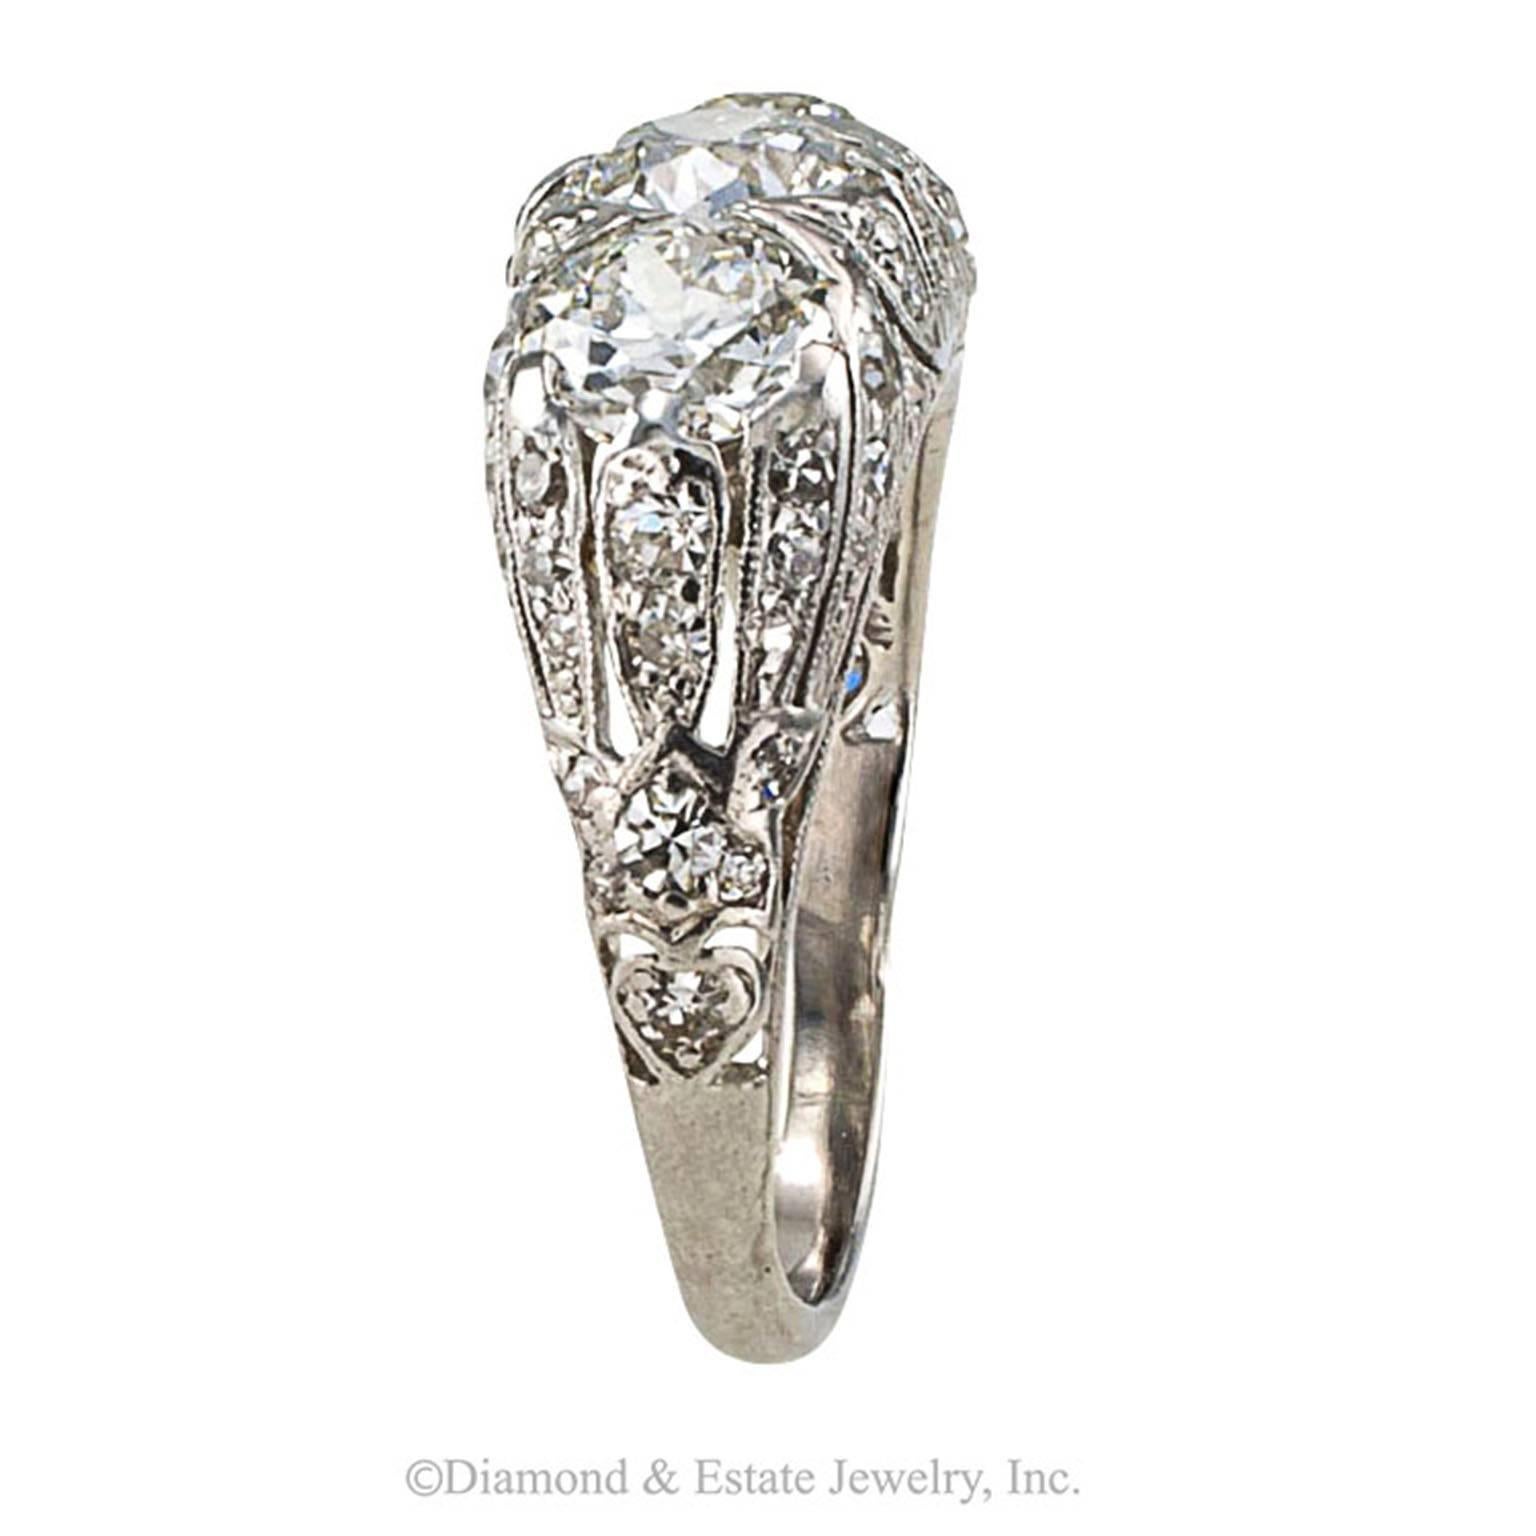 Edwardian Three-stone Diamond Ring

Beauty such as this, and nothing less, to symbolize a loving relationship between two people.  I give you three big diamonds, my love... my love from yesterday, my love of today and my love for tomorrow. 